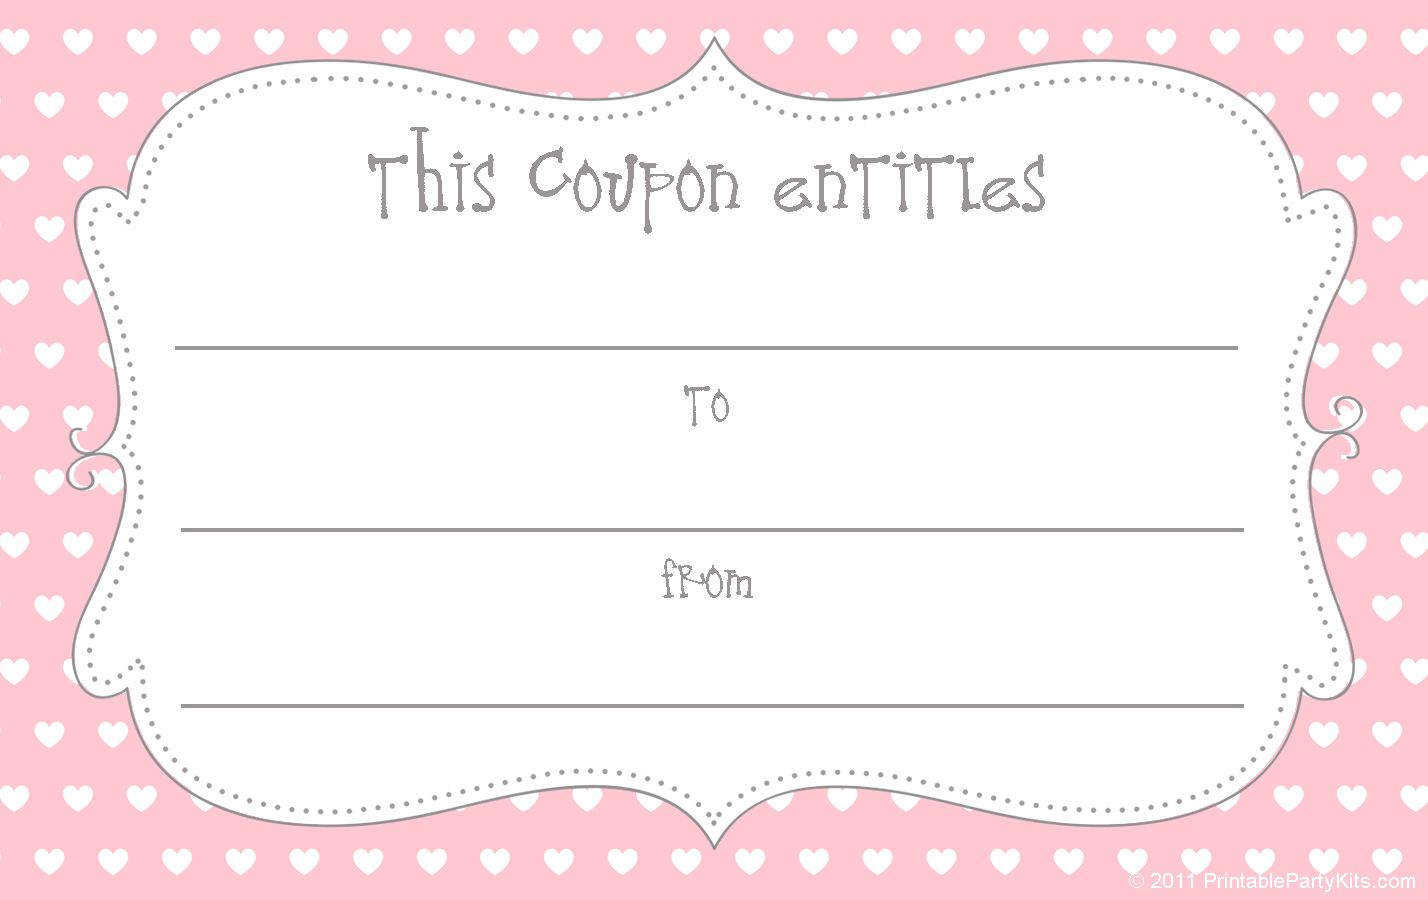 15 Sets Of Free Printable Love Coupons And Templates - Free Printable Love Certificates For Him